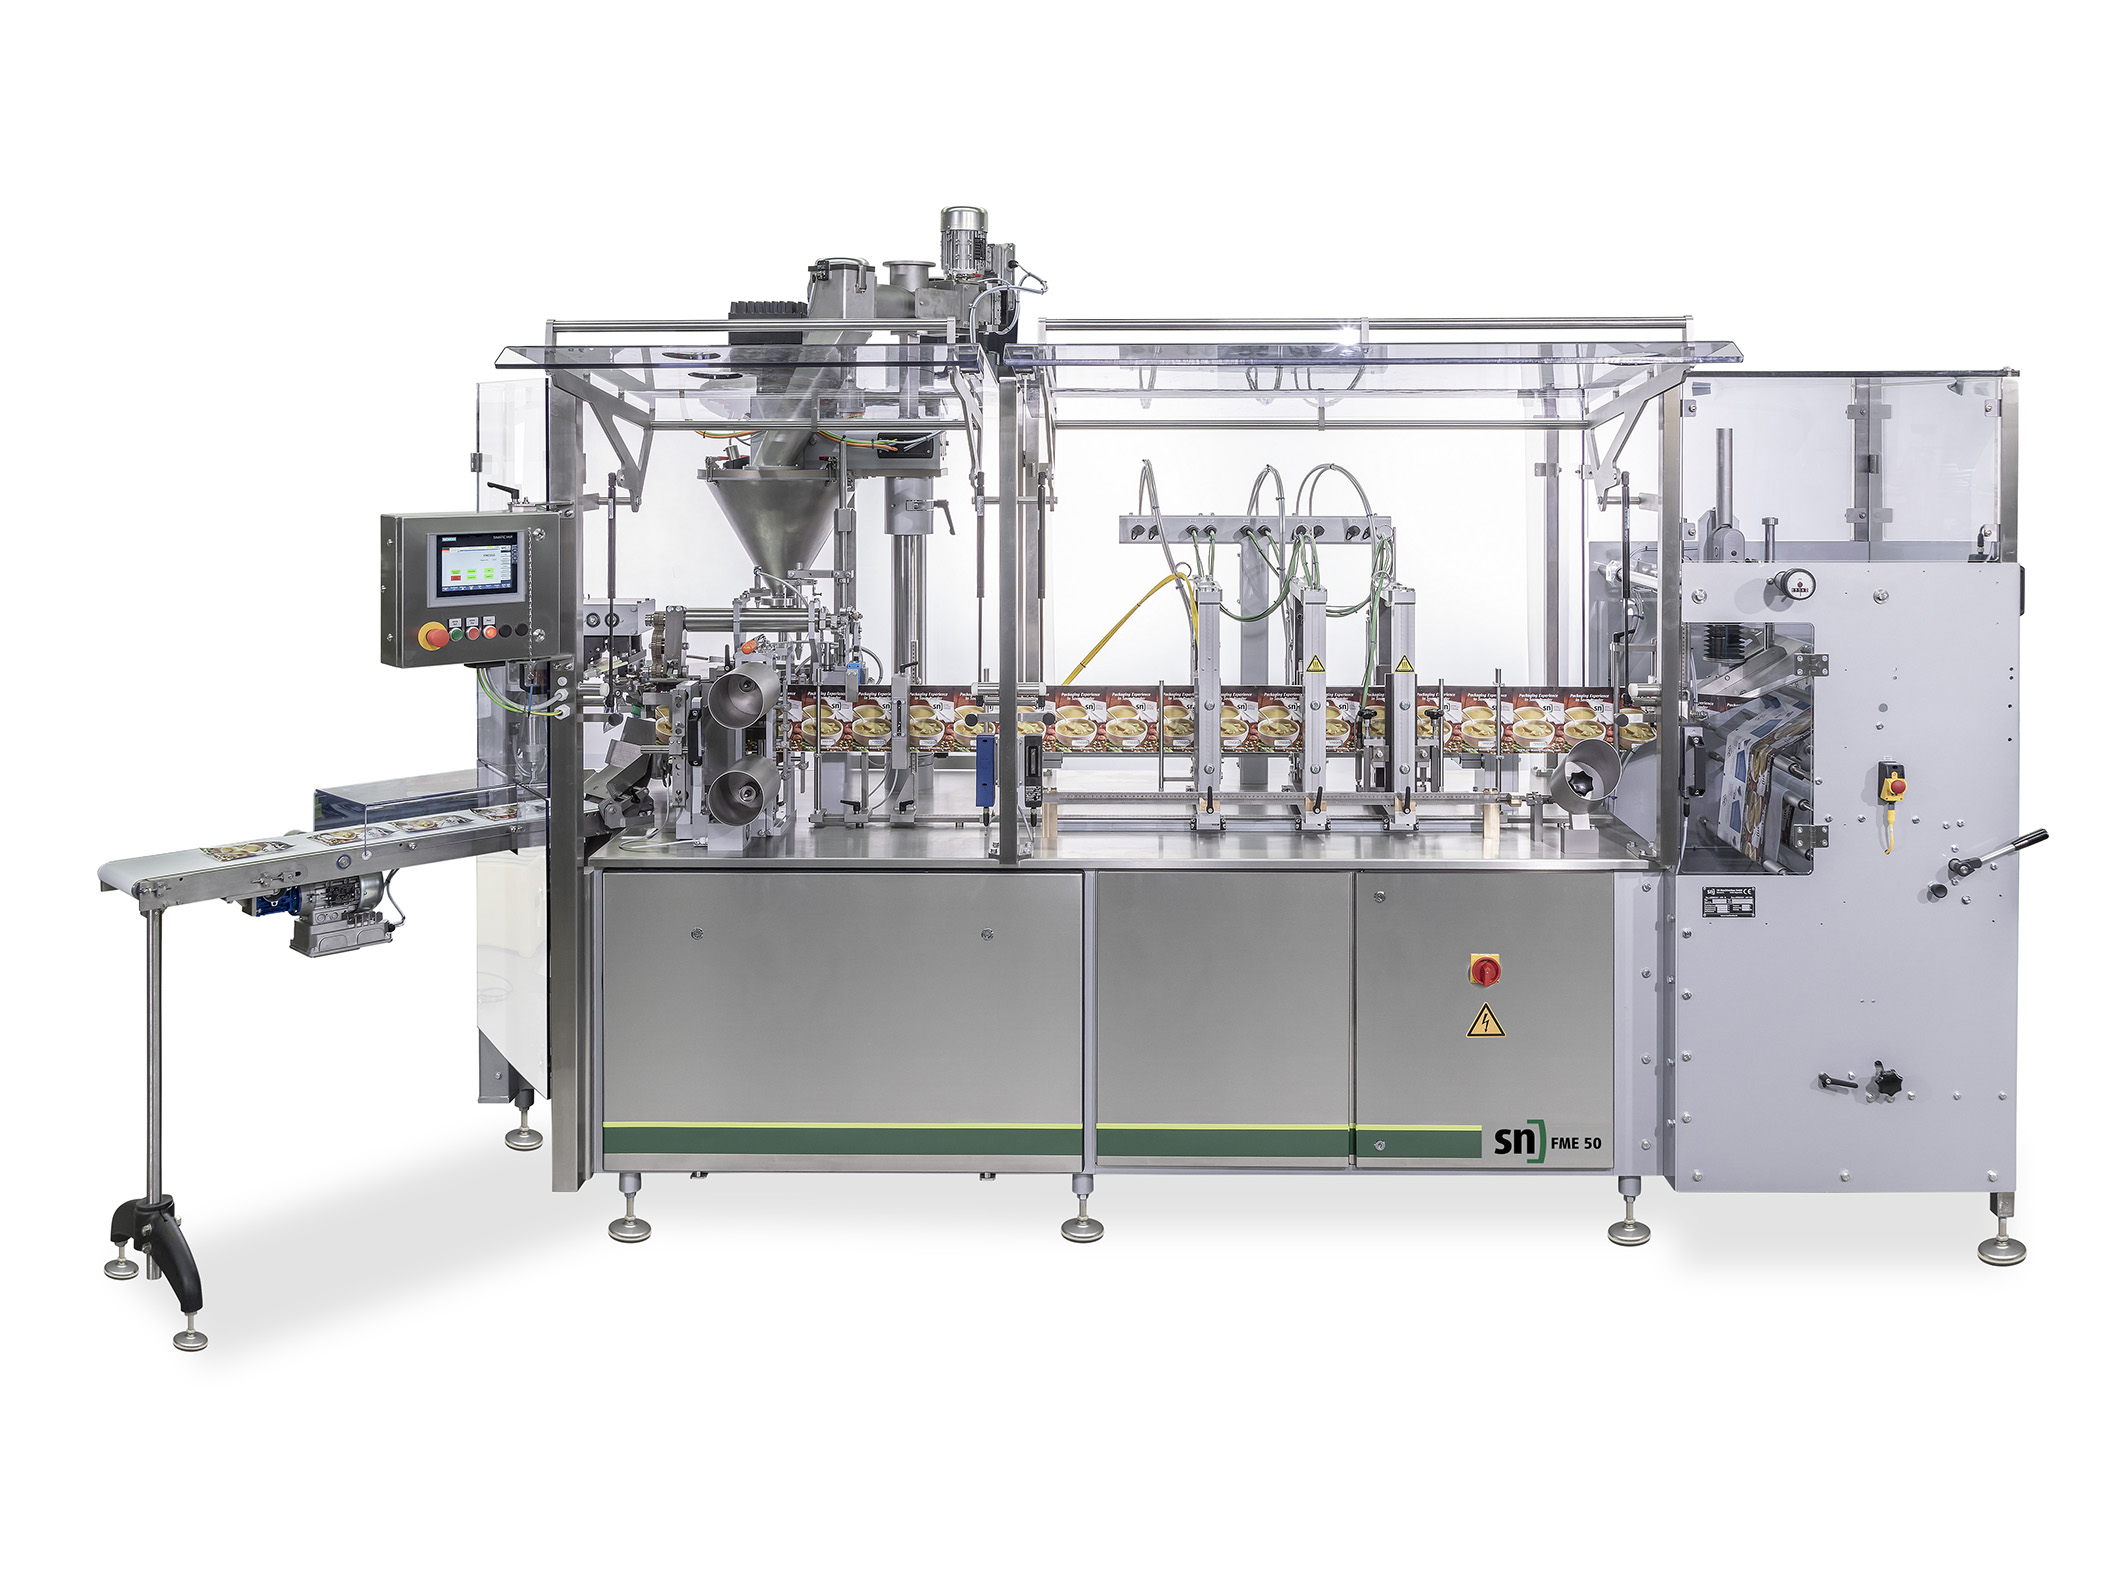 Details about   Subpackage Device Filling Machine Adjustable Packing Speed Stainless Steel Pack 